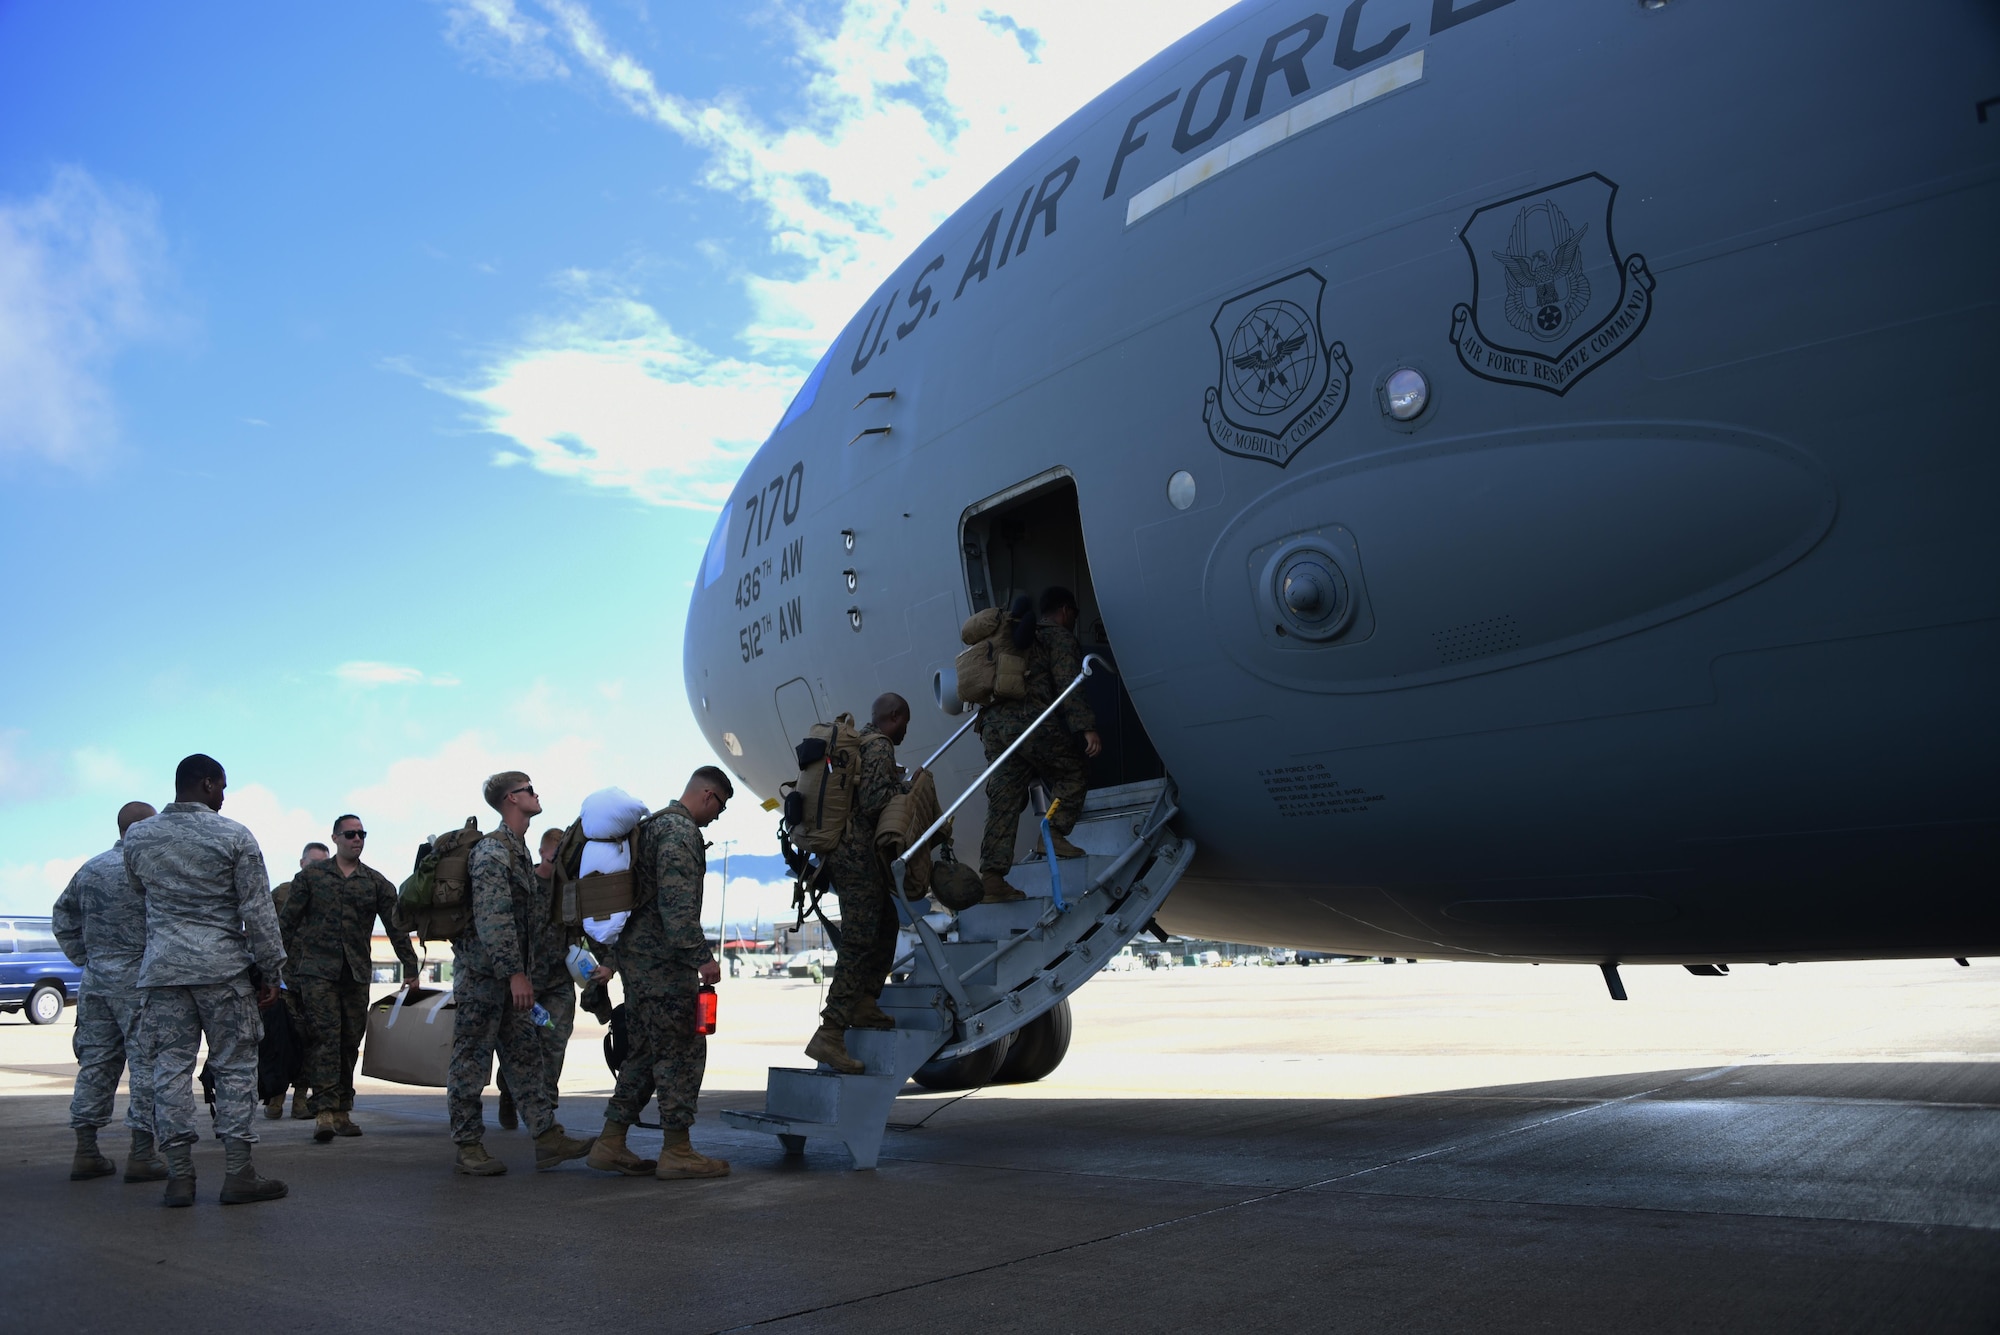 U.S. Marines with the Special Purpose Marine Air-Ground Task Force-Southern Command board a C-17 Globemaster III cargo aircraft at Soto Cano Air Base, Honduras, Oct. 8, 2016, for a deployment to Port-au-Prince, Haiti where they will augment approximately 150 other Soldiers, Airmen and Marines from Joint Task Force-Bravo and SPMAGTF-SC who deployed earlier this week with two CH-53E Super Stallion, three CH-47 Chinook, and two UH-60L and two HH-60L Black Hawk helicopters to provide heavy and medium lift to support the U.S. Agency for International Development-led mission. While in Haiti, SPMAGTF-SC and JTF-Bravo personnel are part of Joint Task Force Matthew, a temporary command established by SOUTHCOM in Port-au-Prince, under the command of U.S. Navy Rear Adm. Cedric Pringle, to coordinate and execute the combined Department of Defense supporting elements that include the Marine and Army aircraft from Soto Cano and ships and aircraft from the Navy, Air Force and Coast Guard. (U.S. Air Force photo by Capt. David Liapis) 